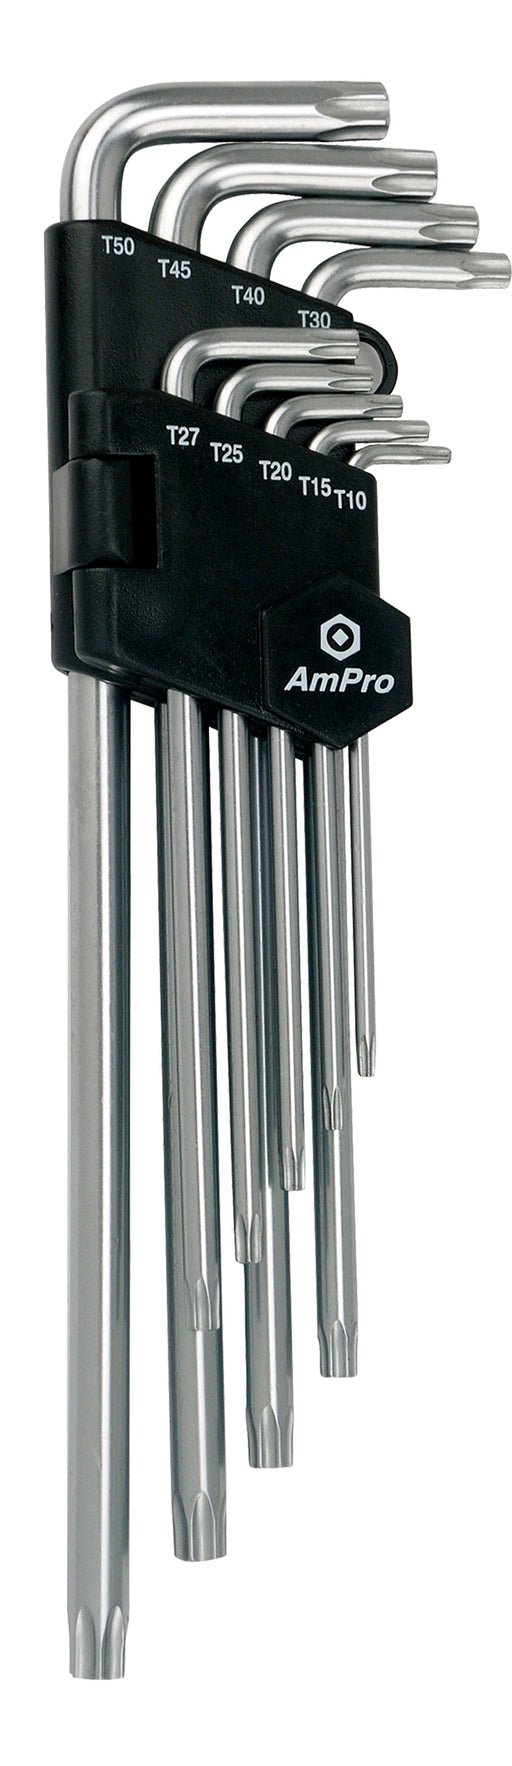 AMPRO 9PC LONG ARM STAR KEY WRENCH SET T10-T50 HSB Trading Online Store